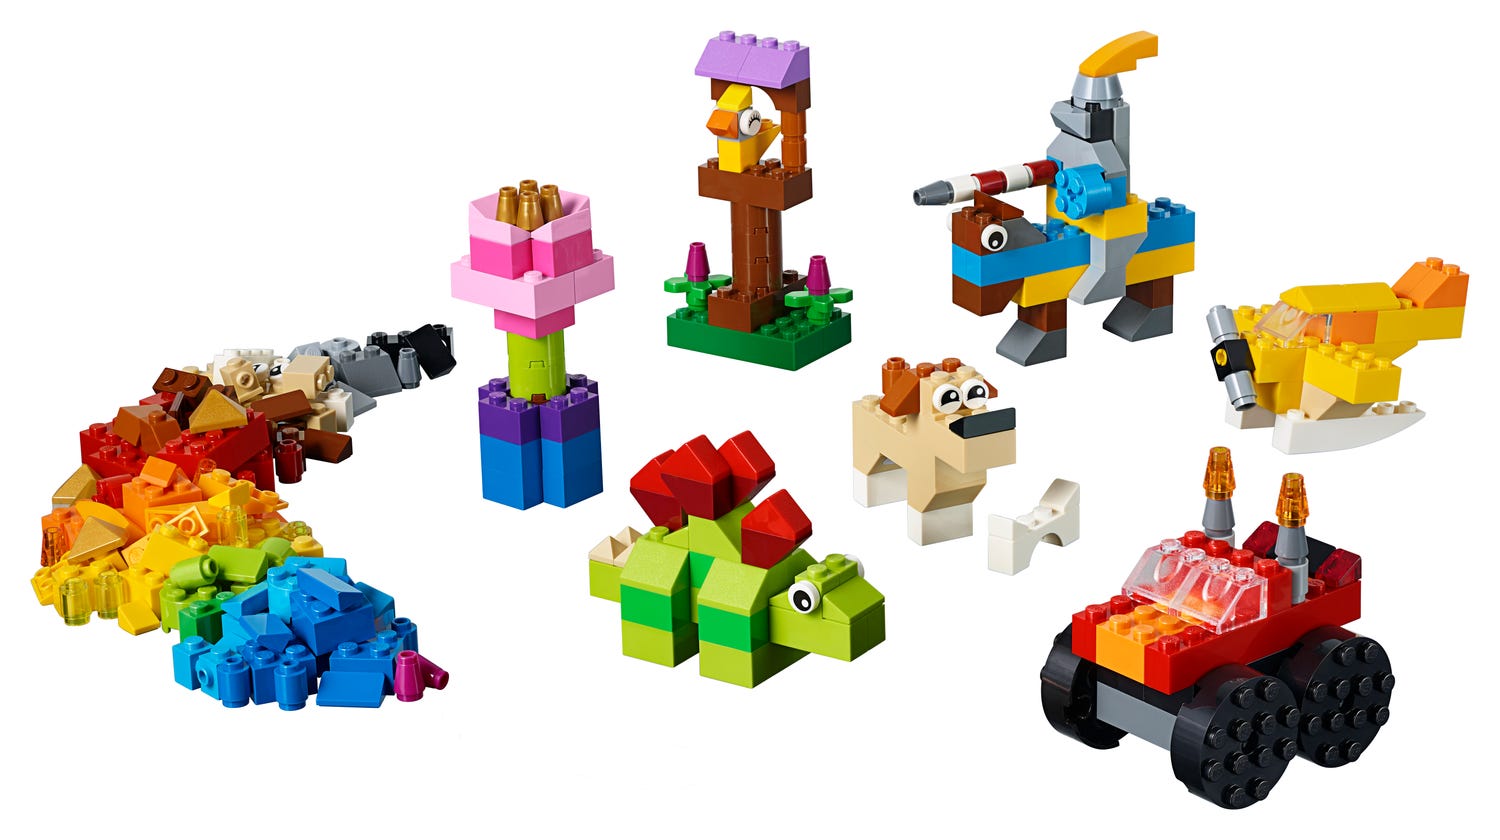 Basic Brick Set 11002 | Classic | Buy at the Official LEGO® Shop